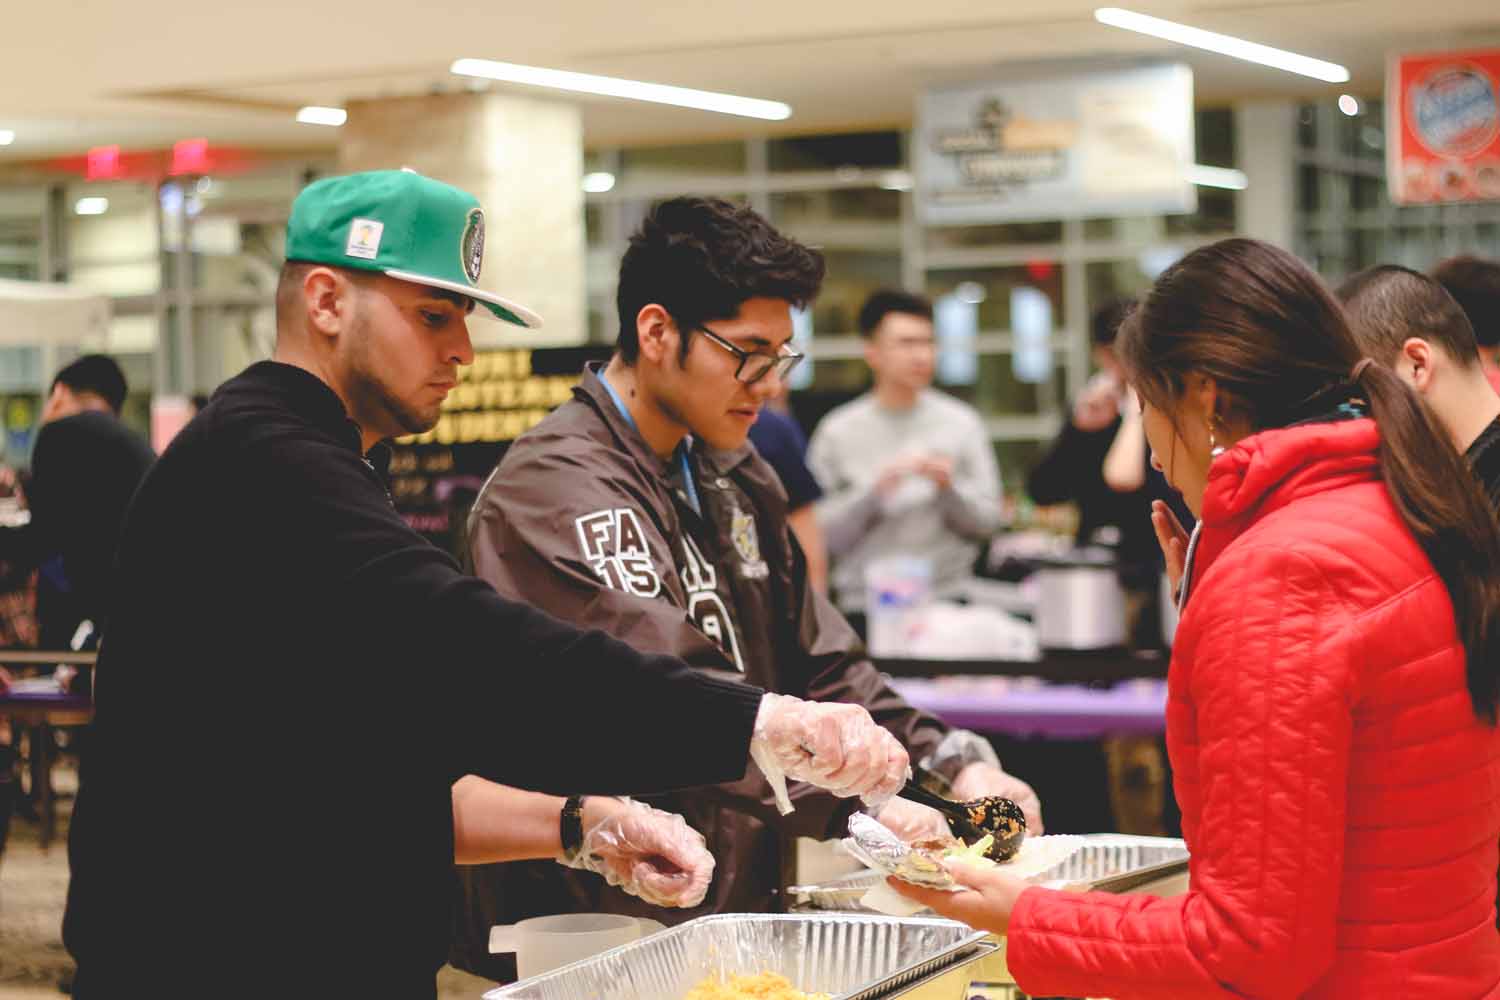 Members of Lambda Theta Pi, a Latin fraternity on campus, serve traditional dishes to attendees. Photo by Hanna Yowell.